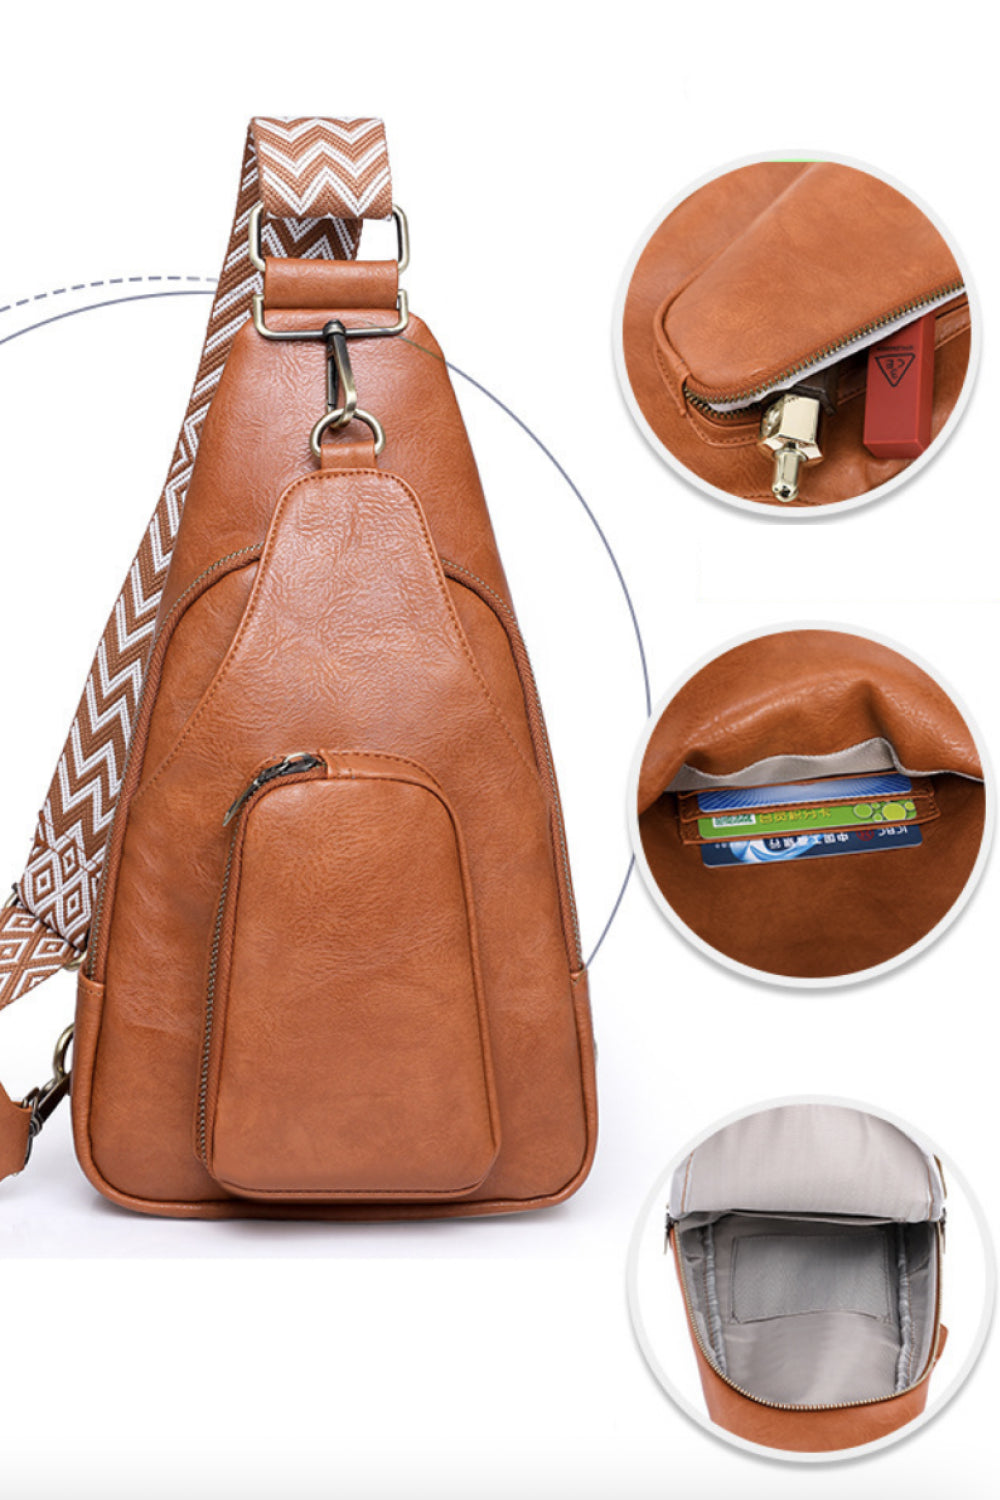 Take A Trip Sling Bag - 6 Colors Ivory / One Size